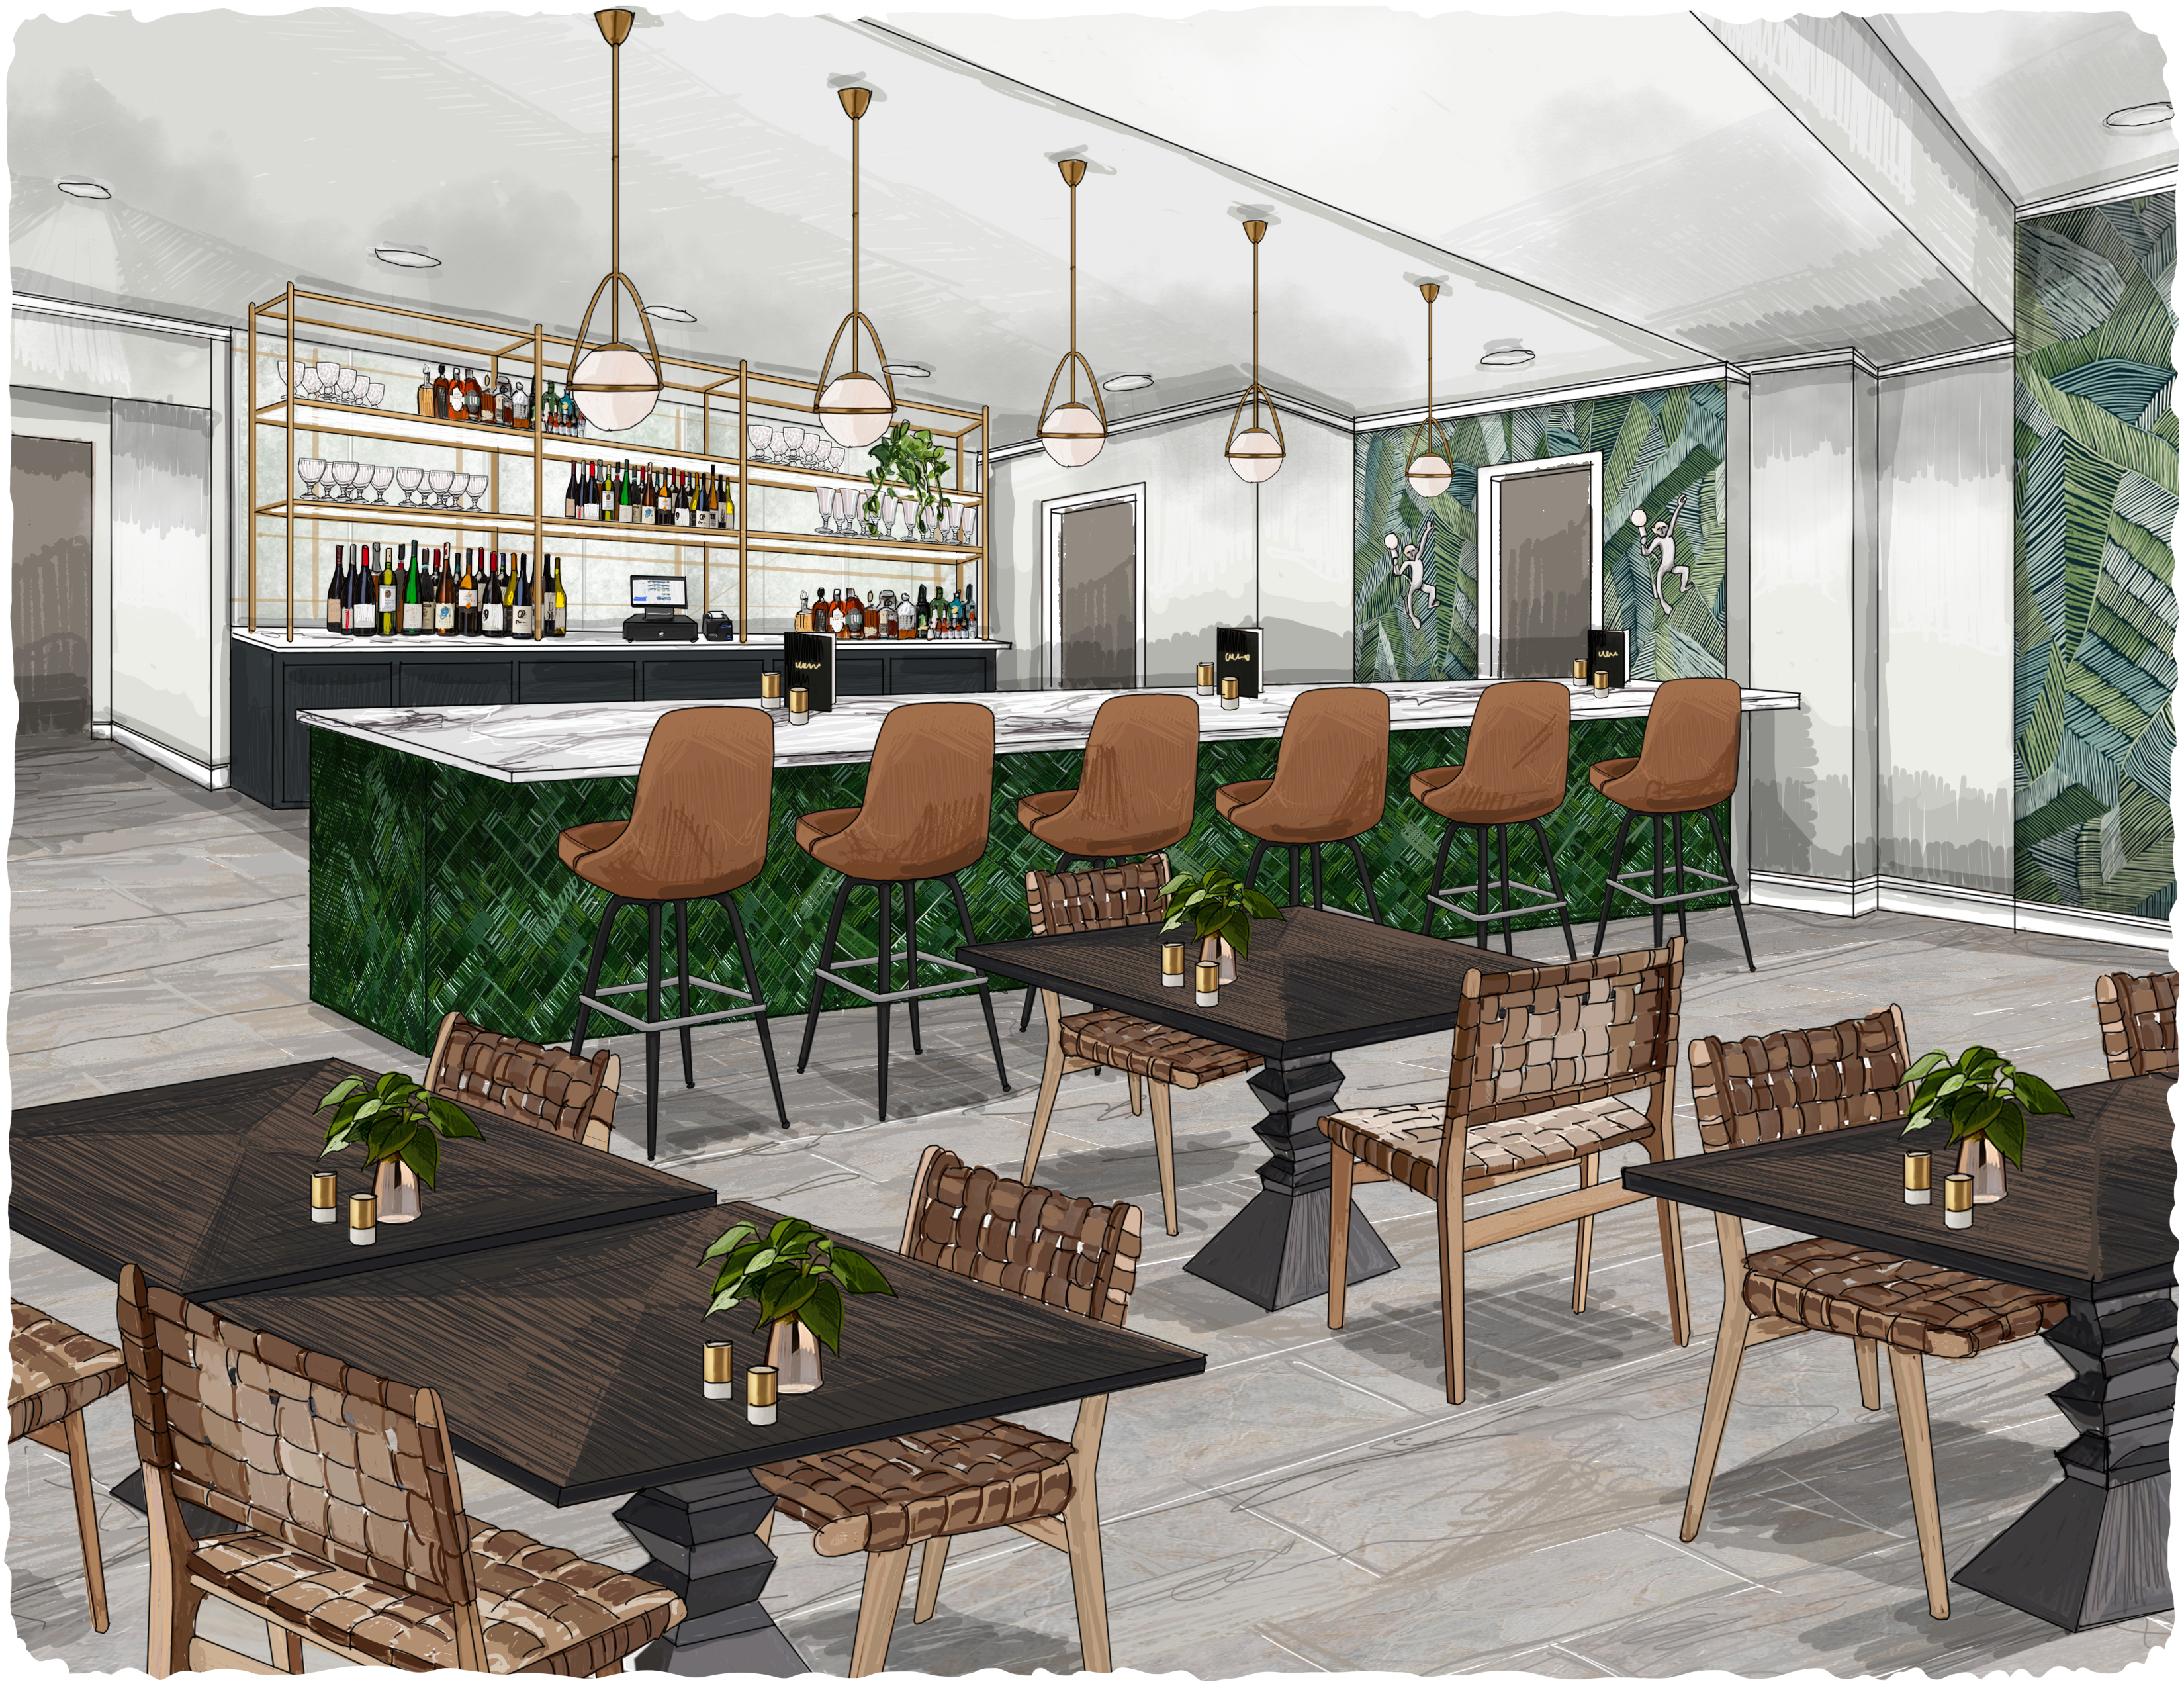 Restaurant interior rendering shows lots of green leaf decor and six high-top brown leather seats at a bar.